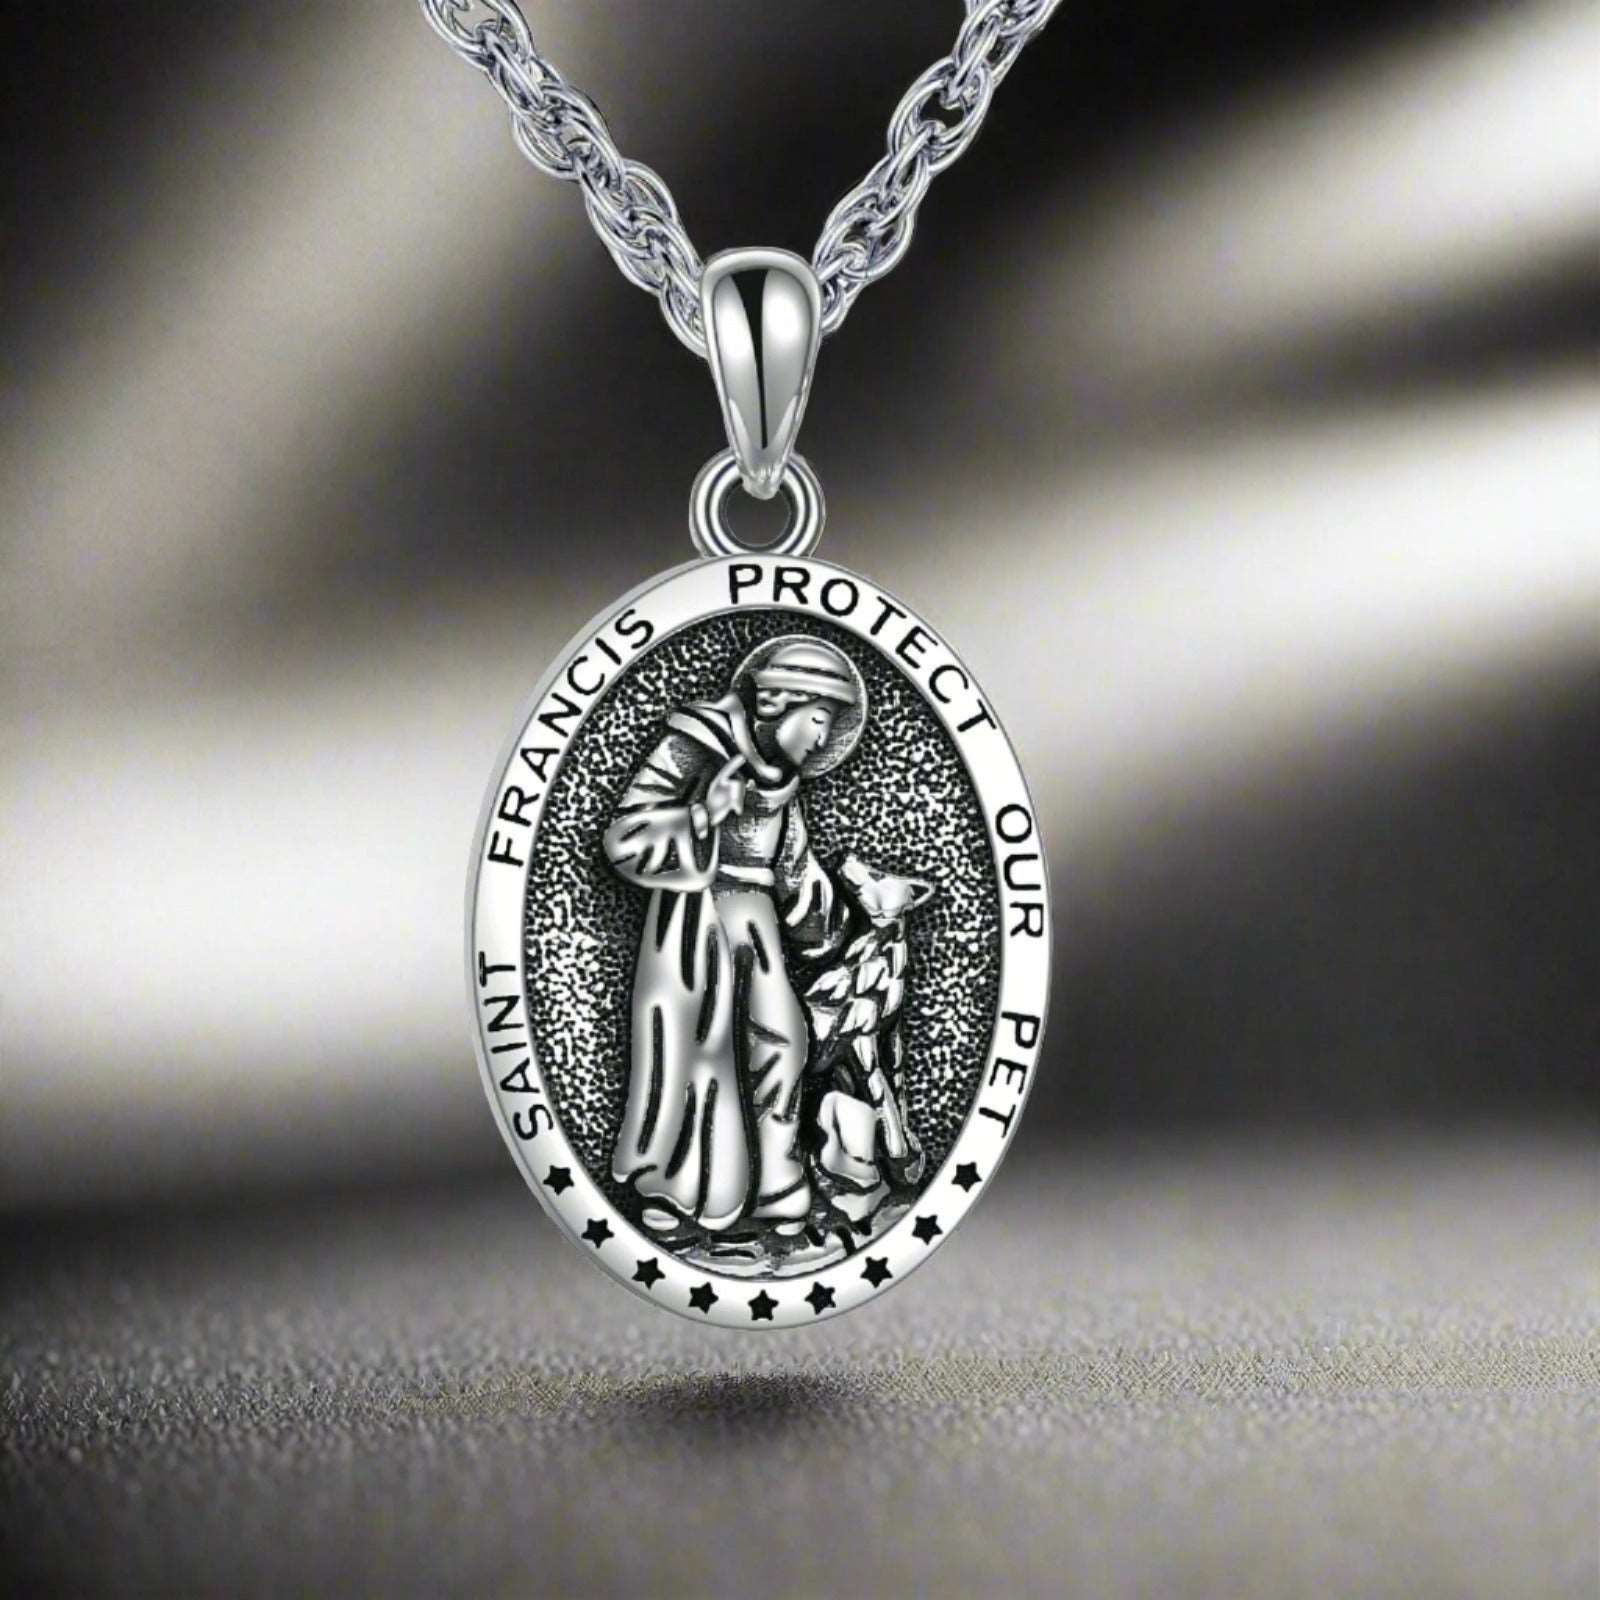 Silver Necklace - "St Francis"